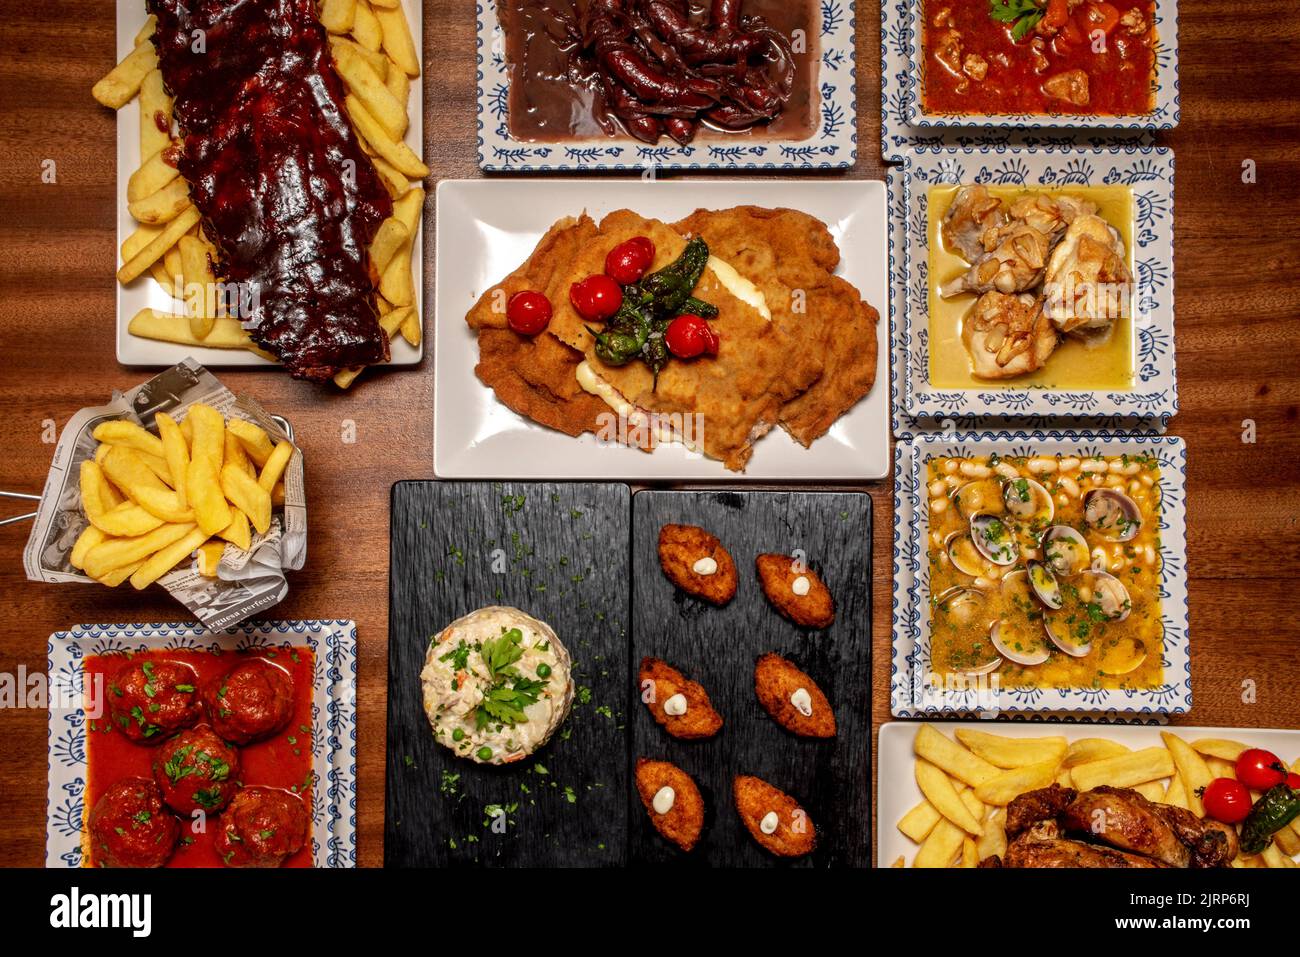 Plates and trays of typical recipes of Spanish gastronomy with croquette tapas, meatballs, beans with clams, garlic chicken, wine sausages and Russian Stock Photo